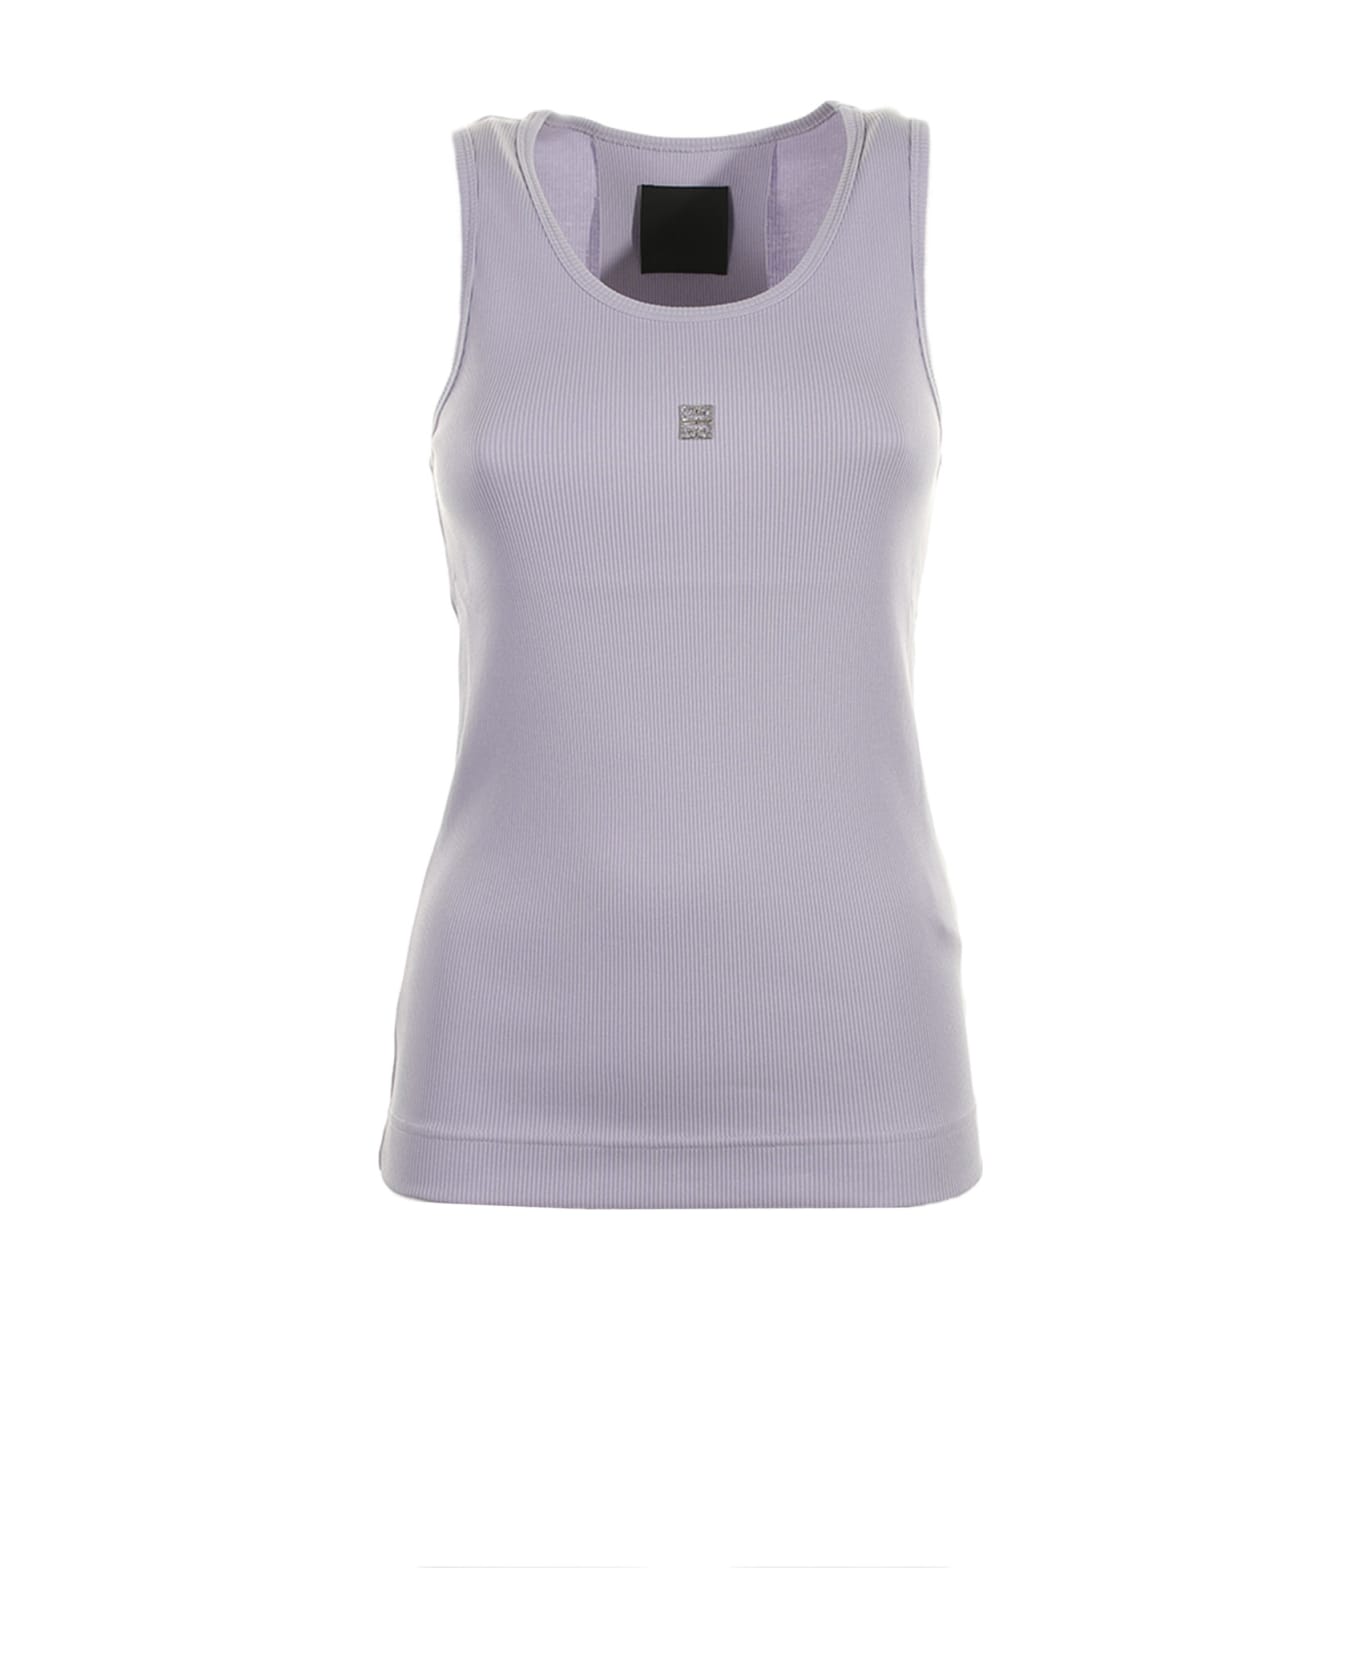 Givenchy Tank Top With Logo - LAVANDER タンクトップ